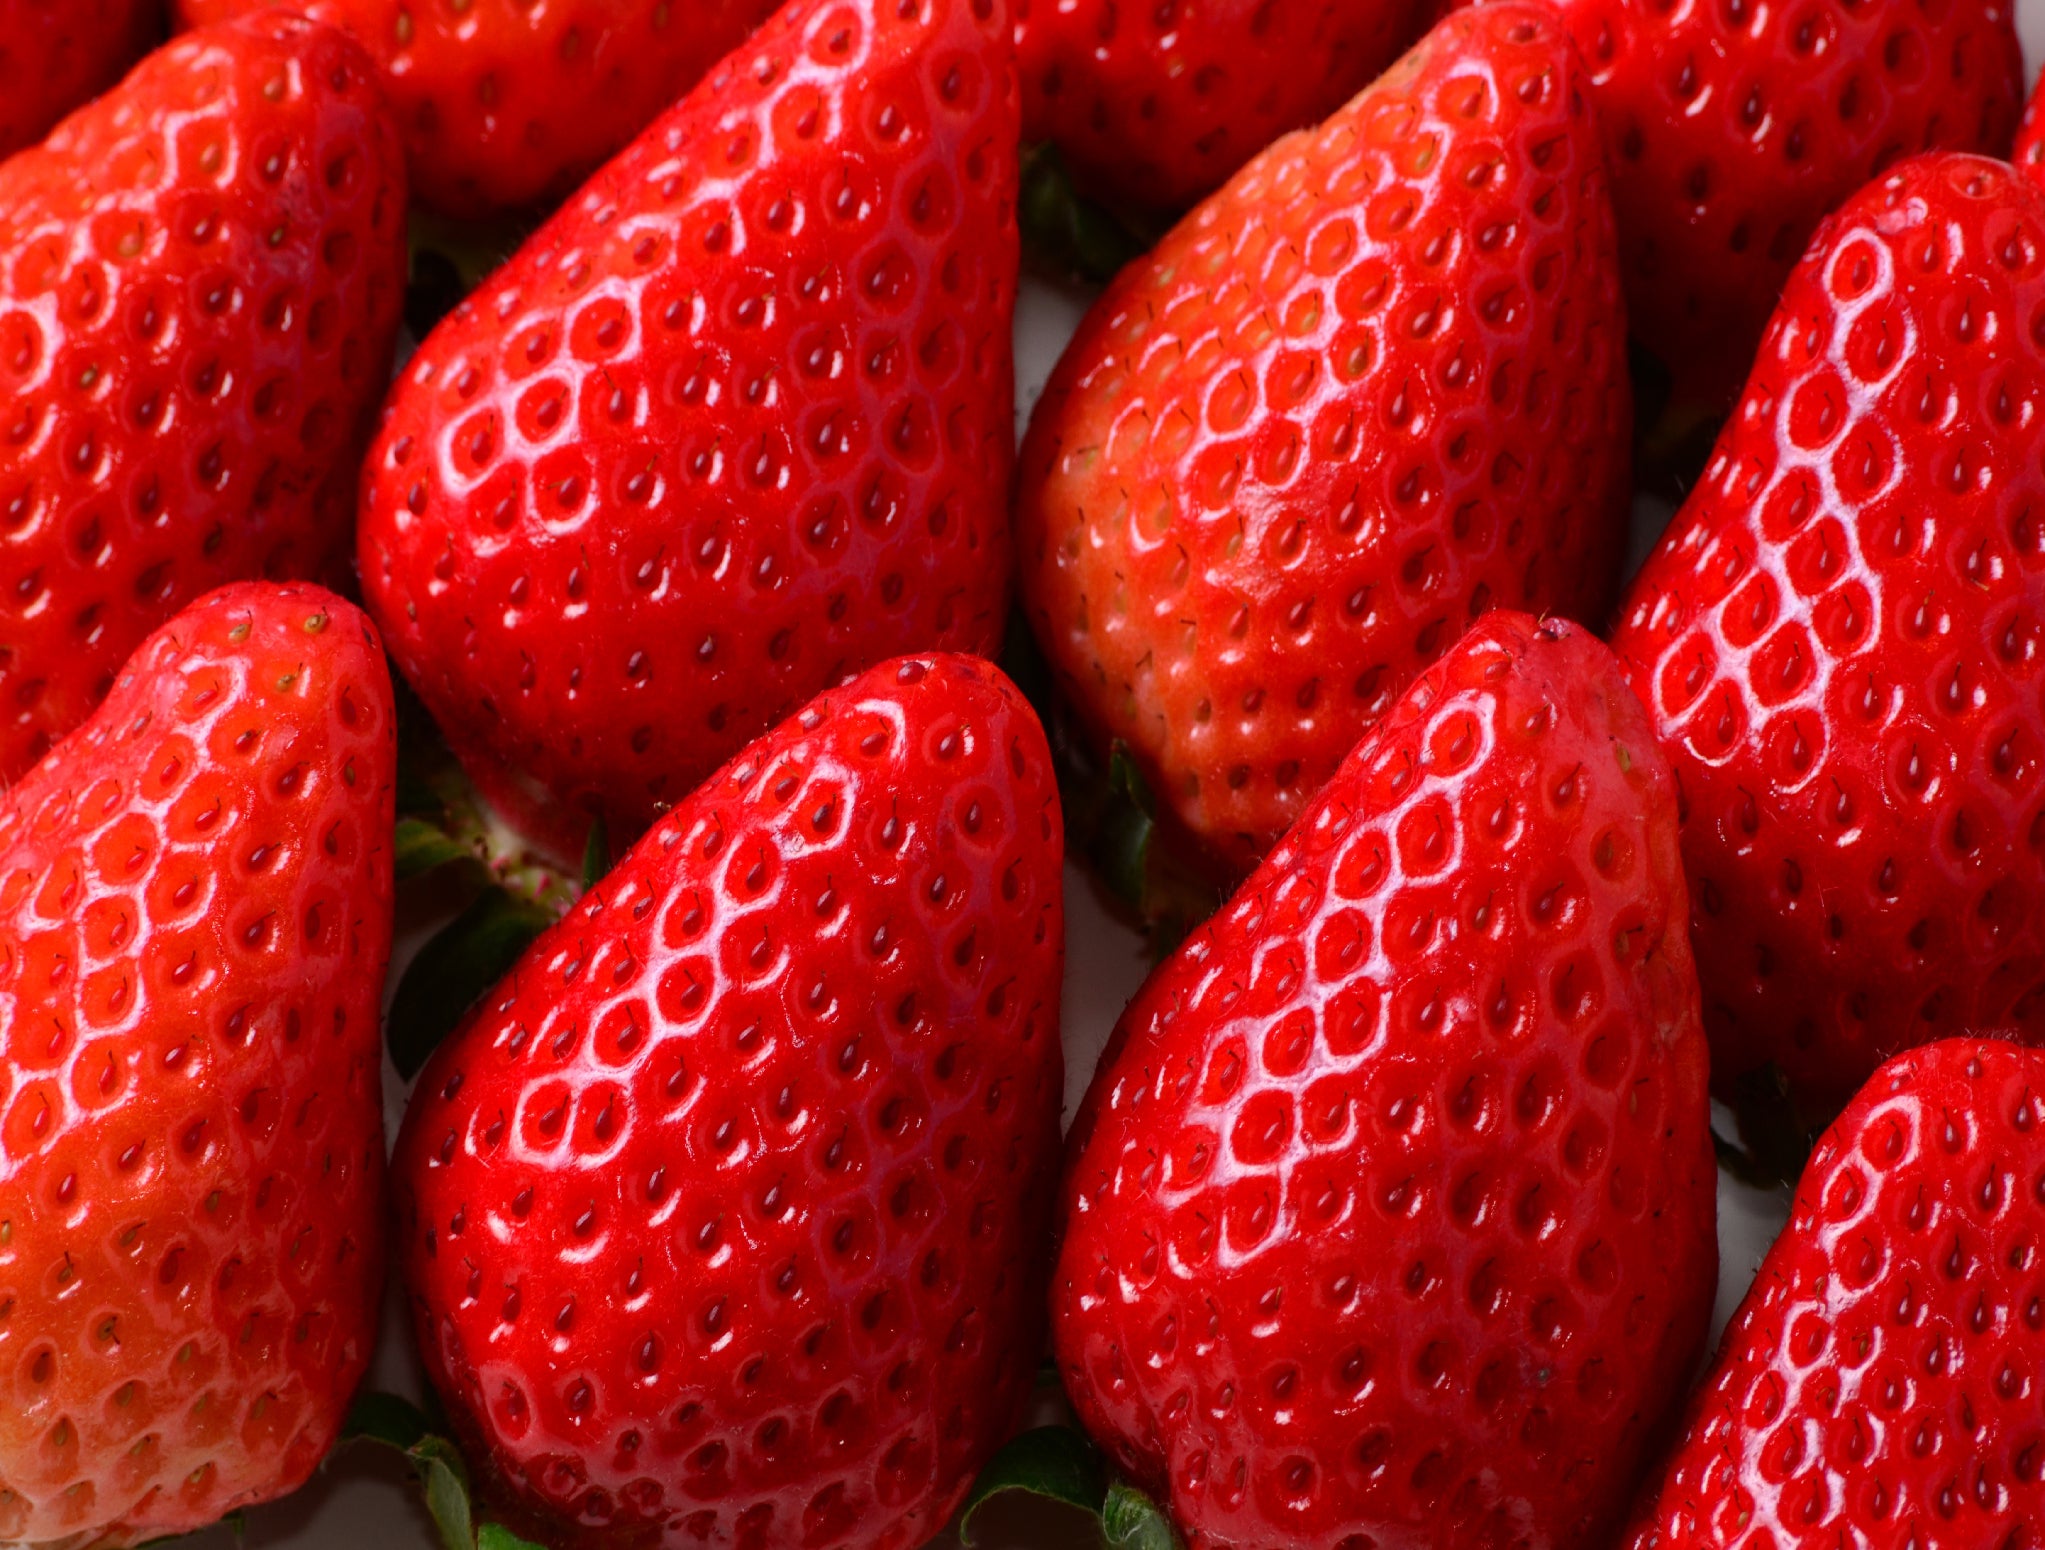 Japanese DELUXE Strawberry Large "Tochi Otome"  400g - limited availability